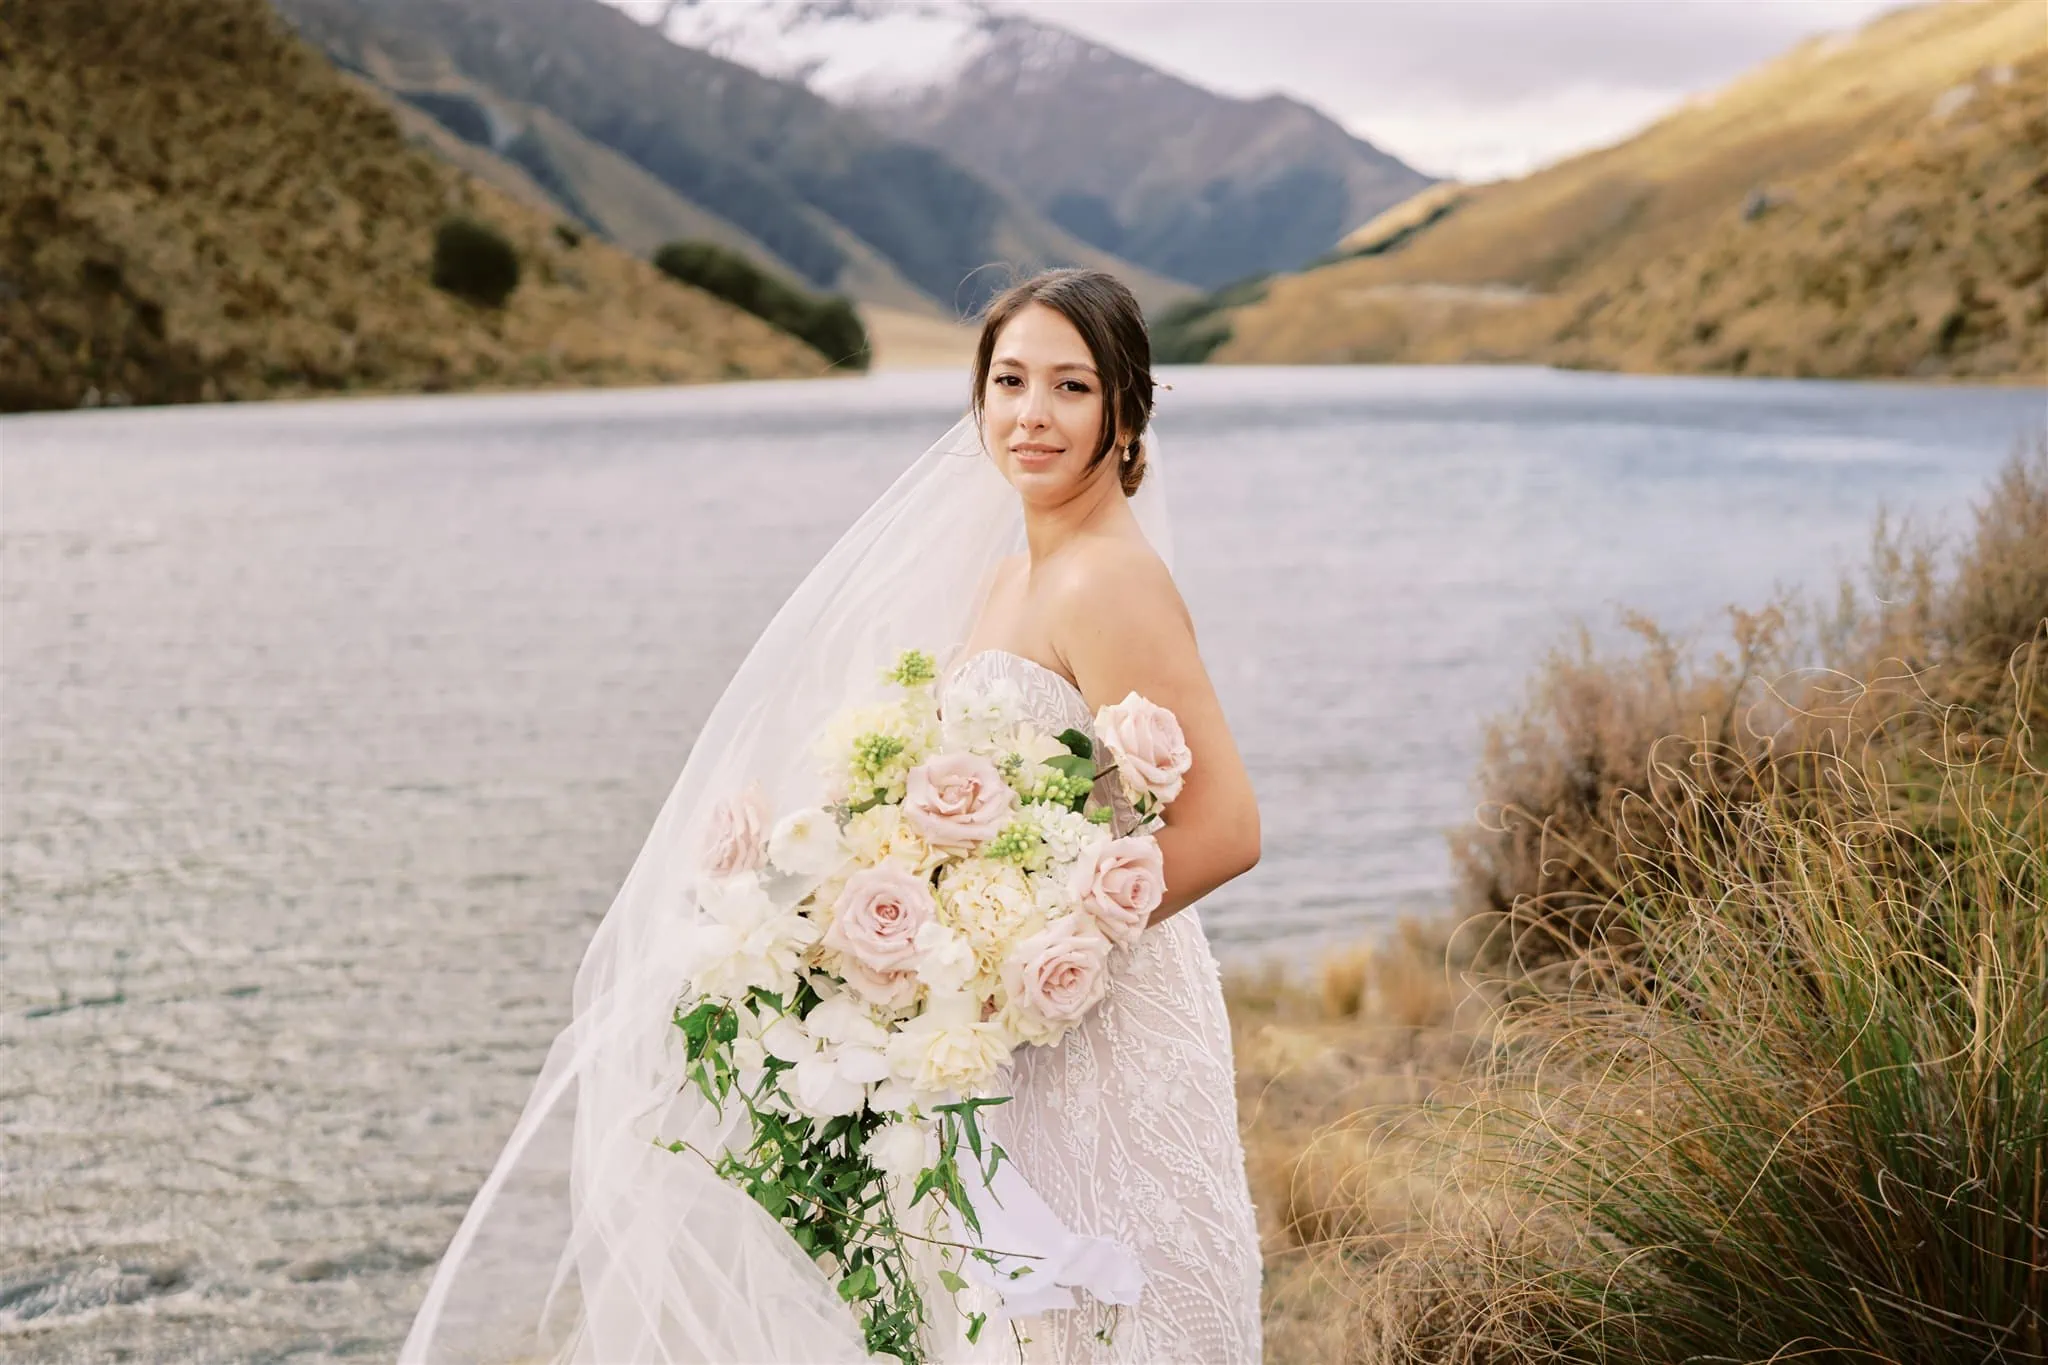 Queenstown Elopement Heli Wedding Photographer クイーンズタウン結婚式 | Mariah, the bride, standing by a lake in Queenstown with a bouquet of flowers.